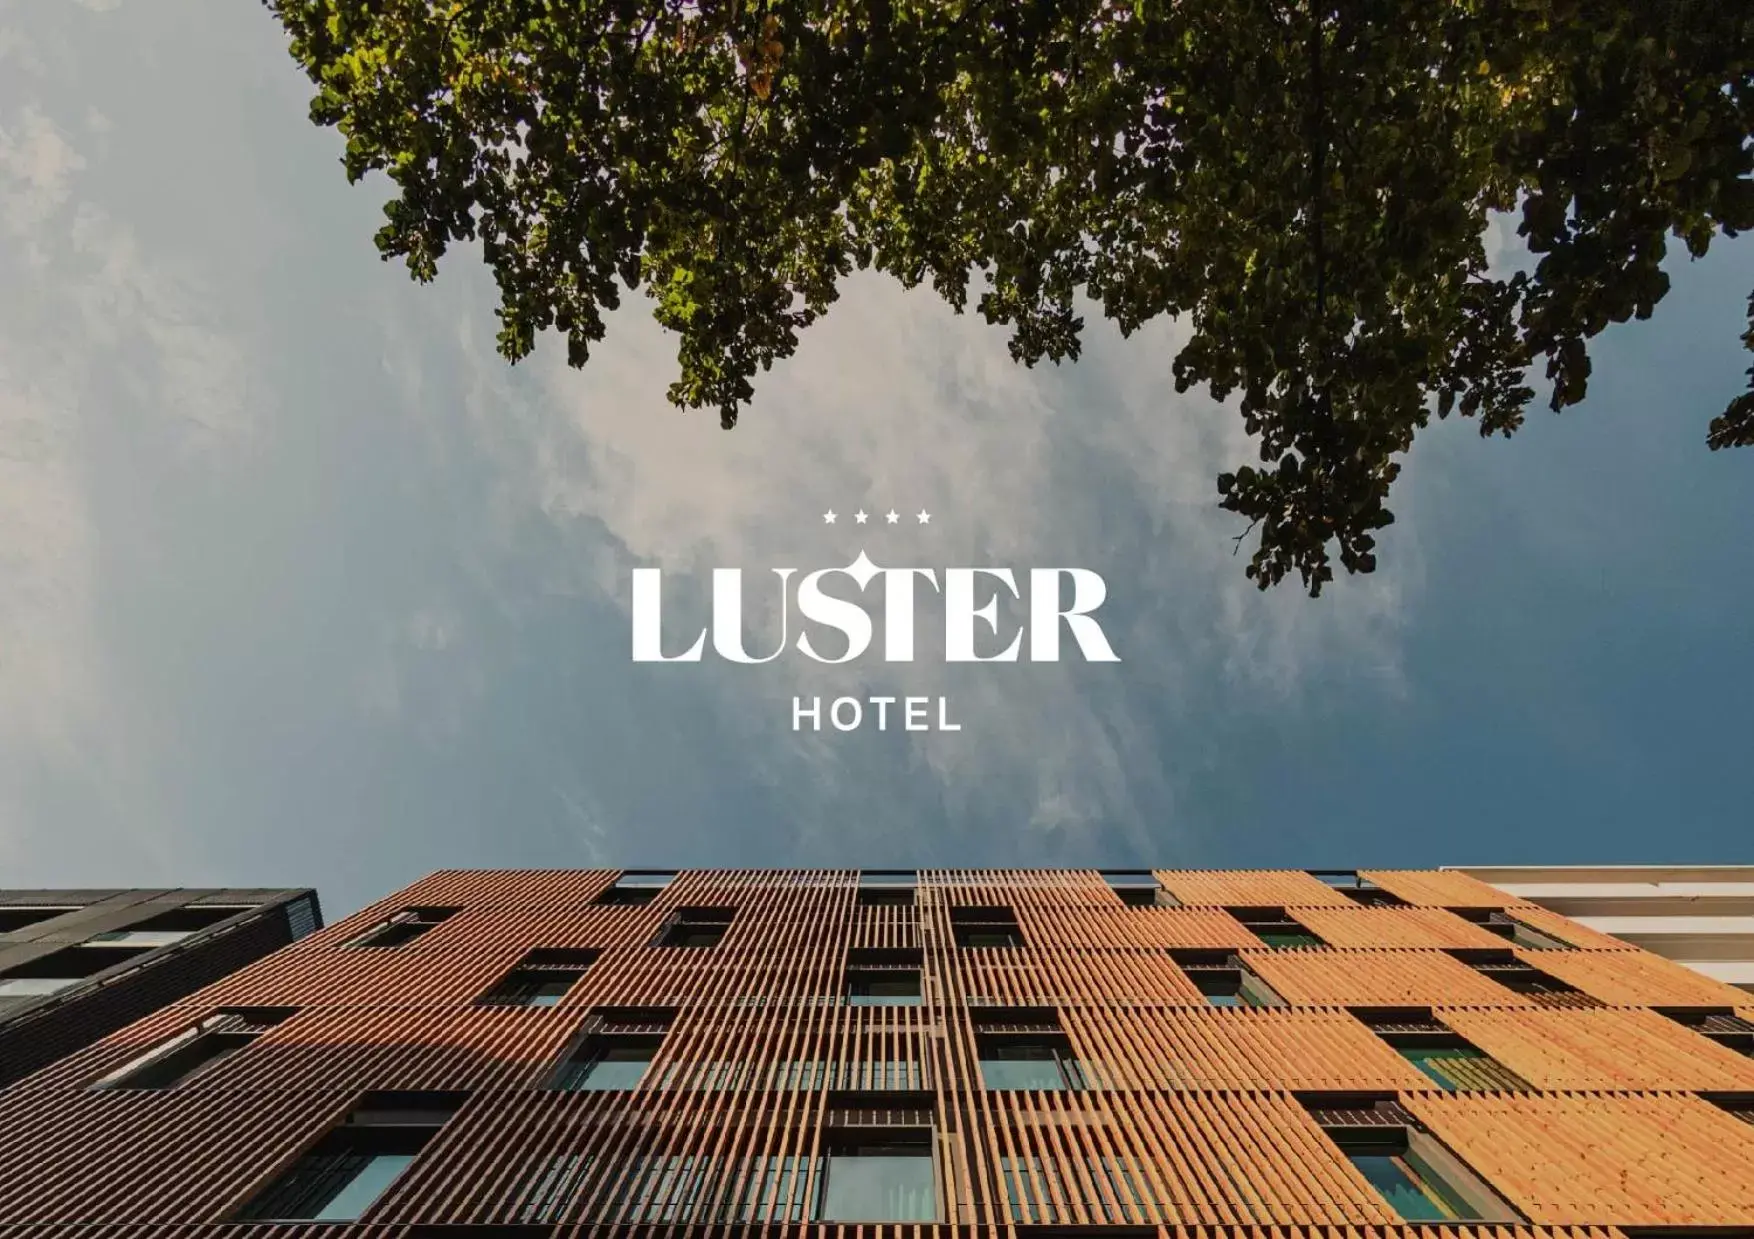 Property building in LUSTER Hotel